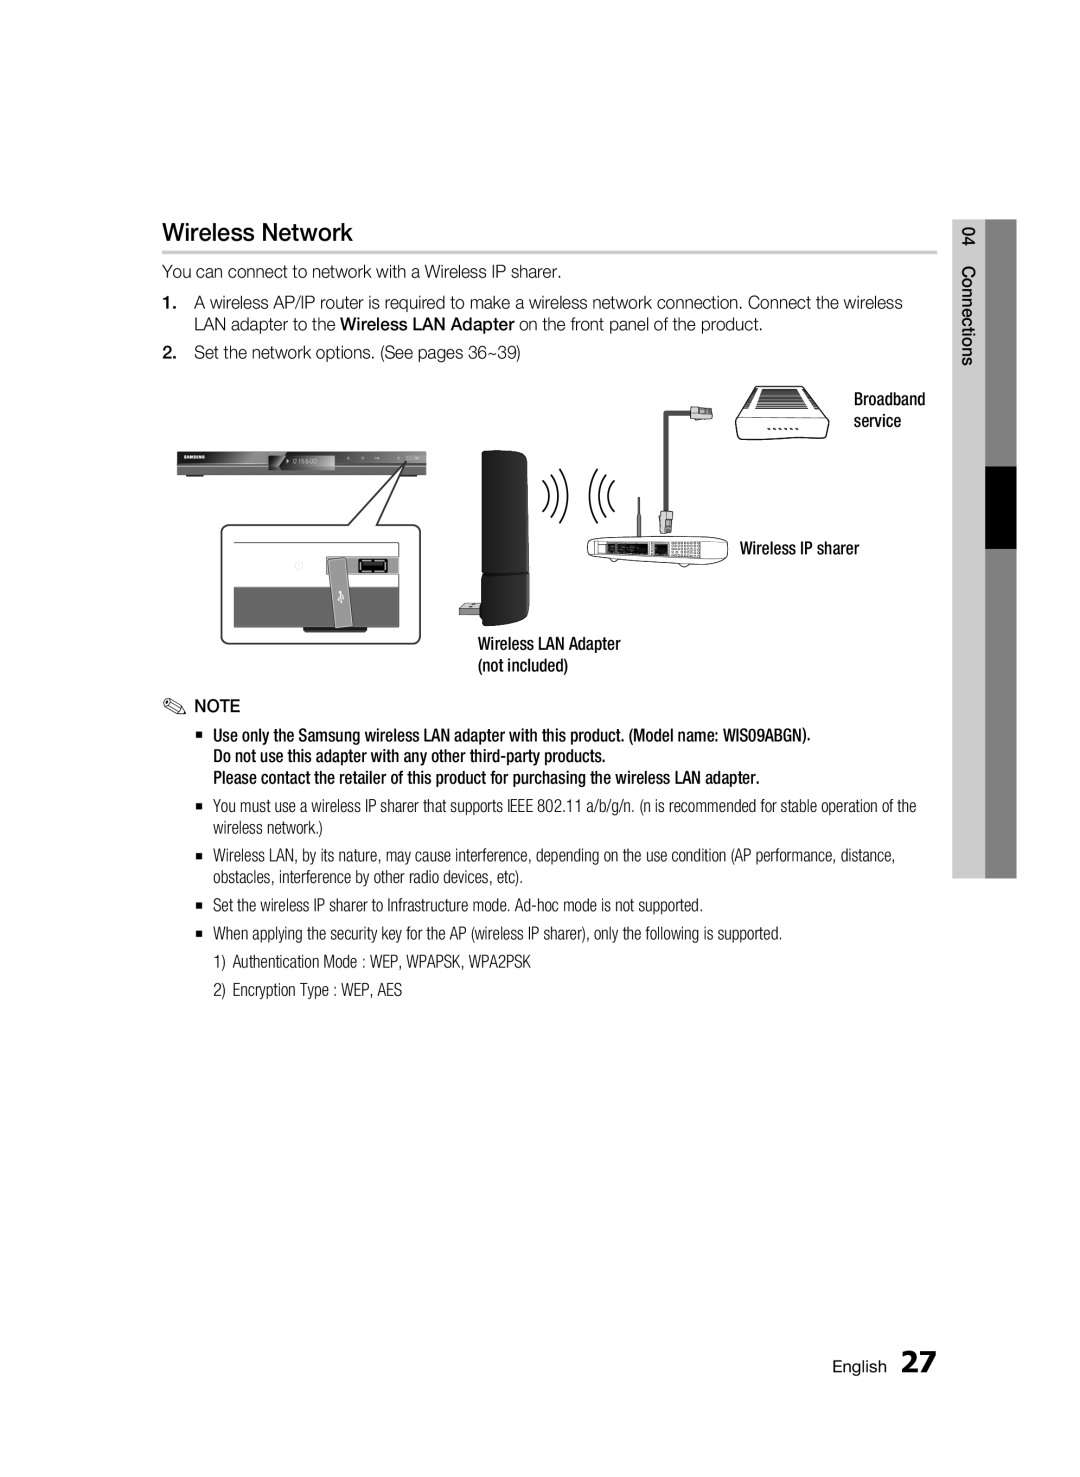 Samsung BD-C5300/XEE manual Wireless Network, You can connect to network with a Wireless IP sharer, Broadband service 